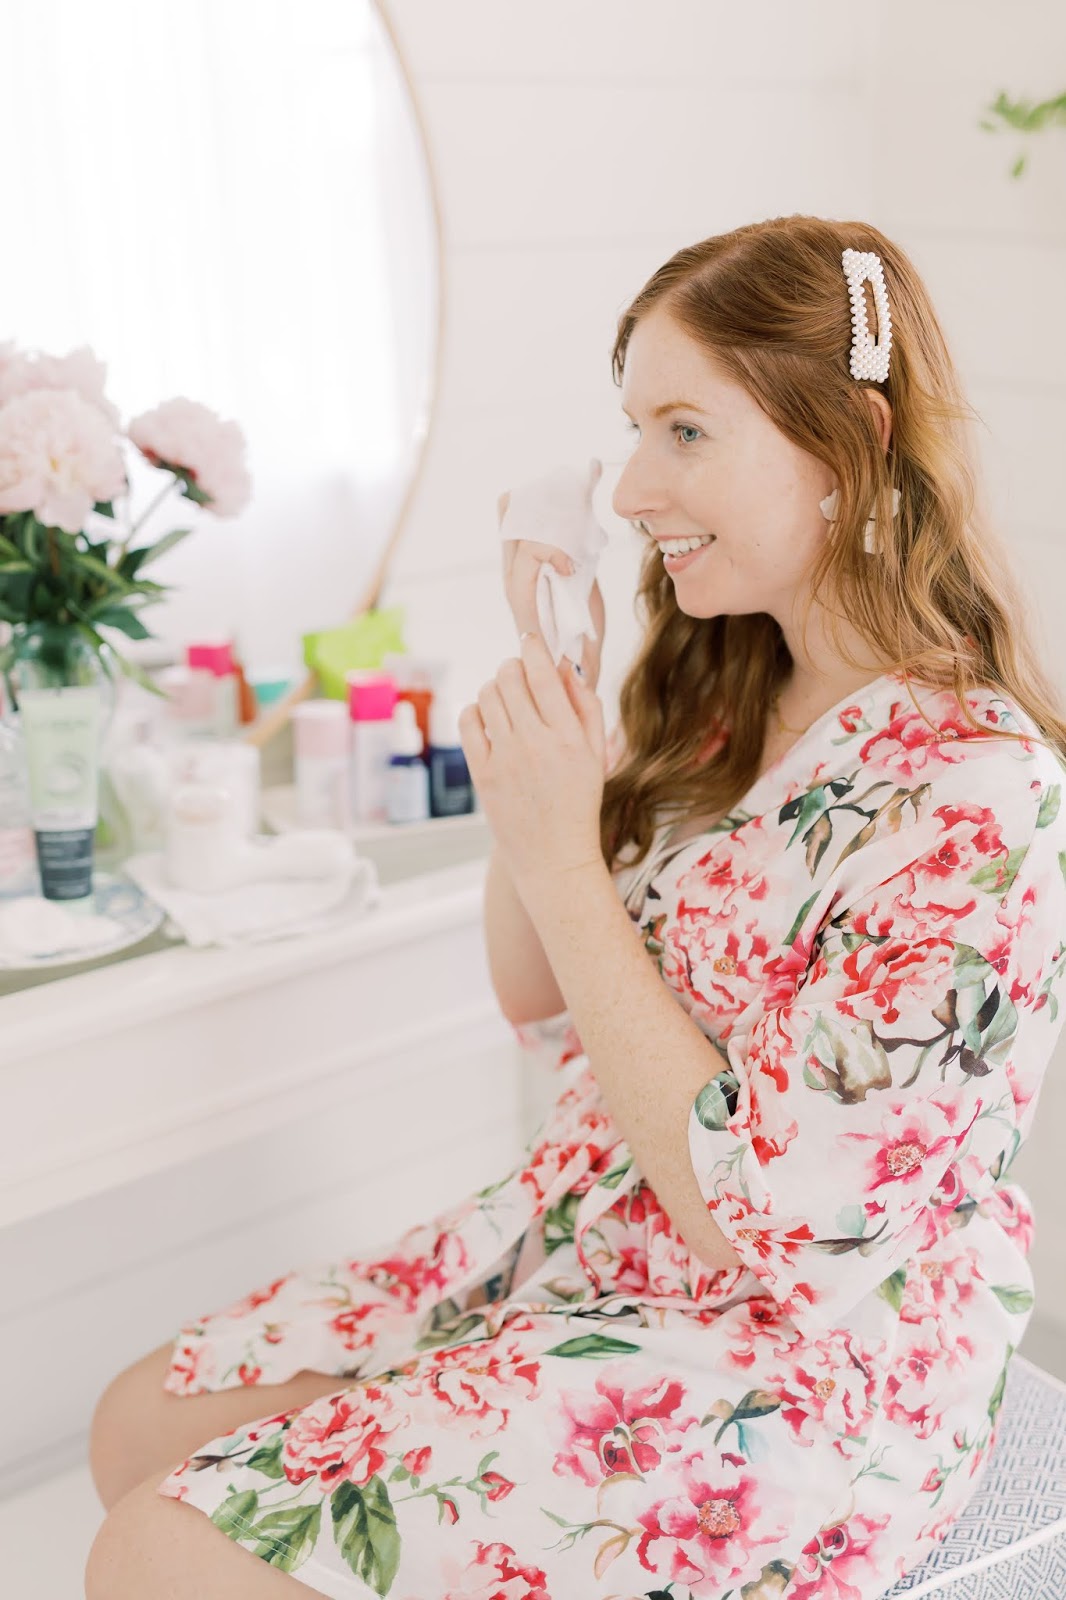 The Top 5 Skincare Tips I Wish I Could Tell My Younger Self.